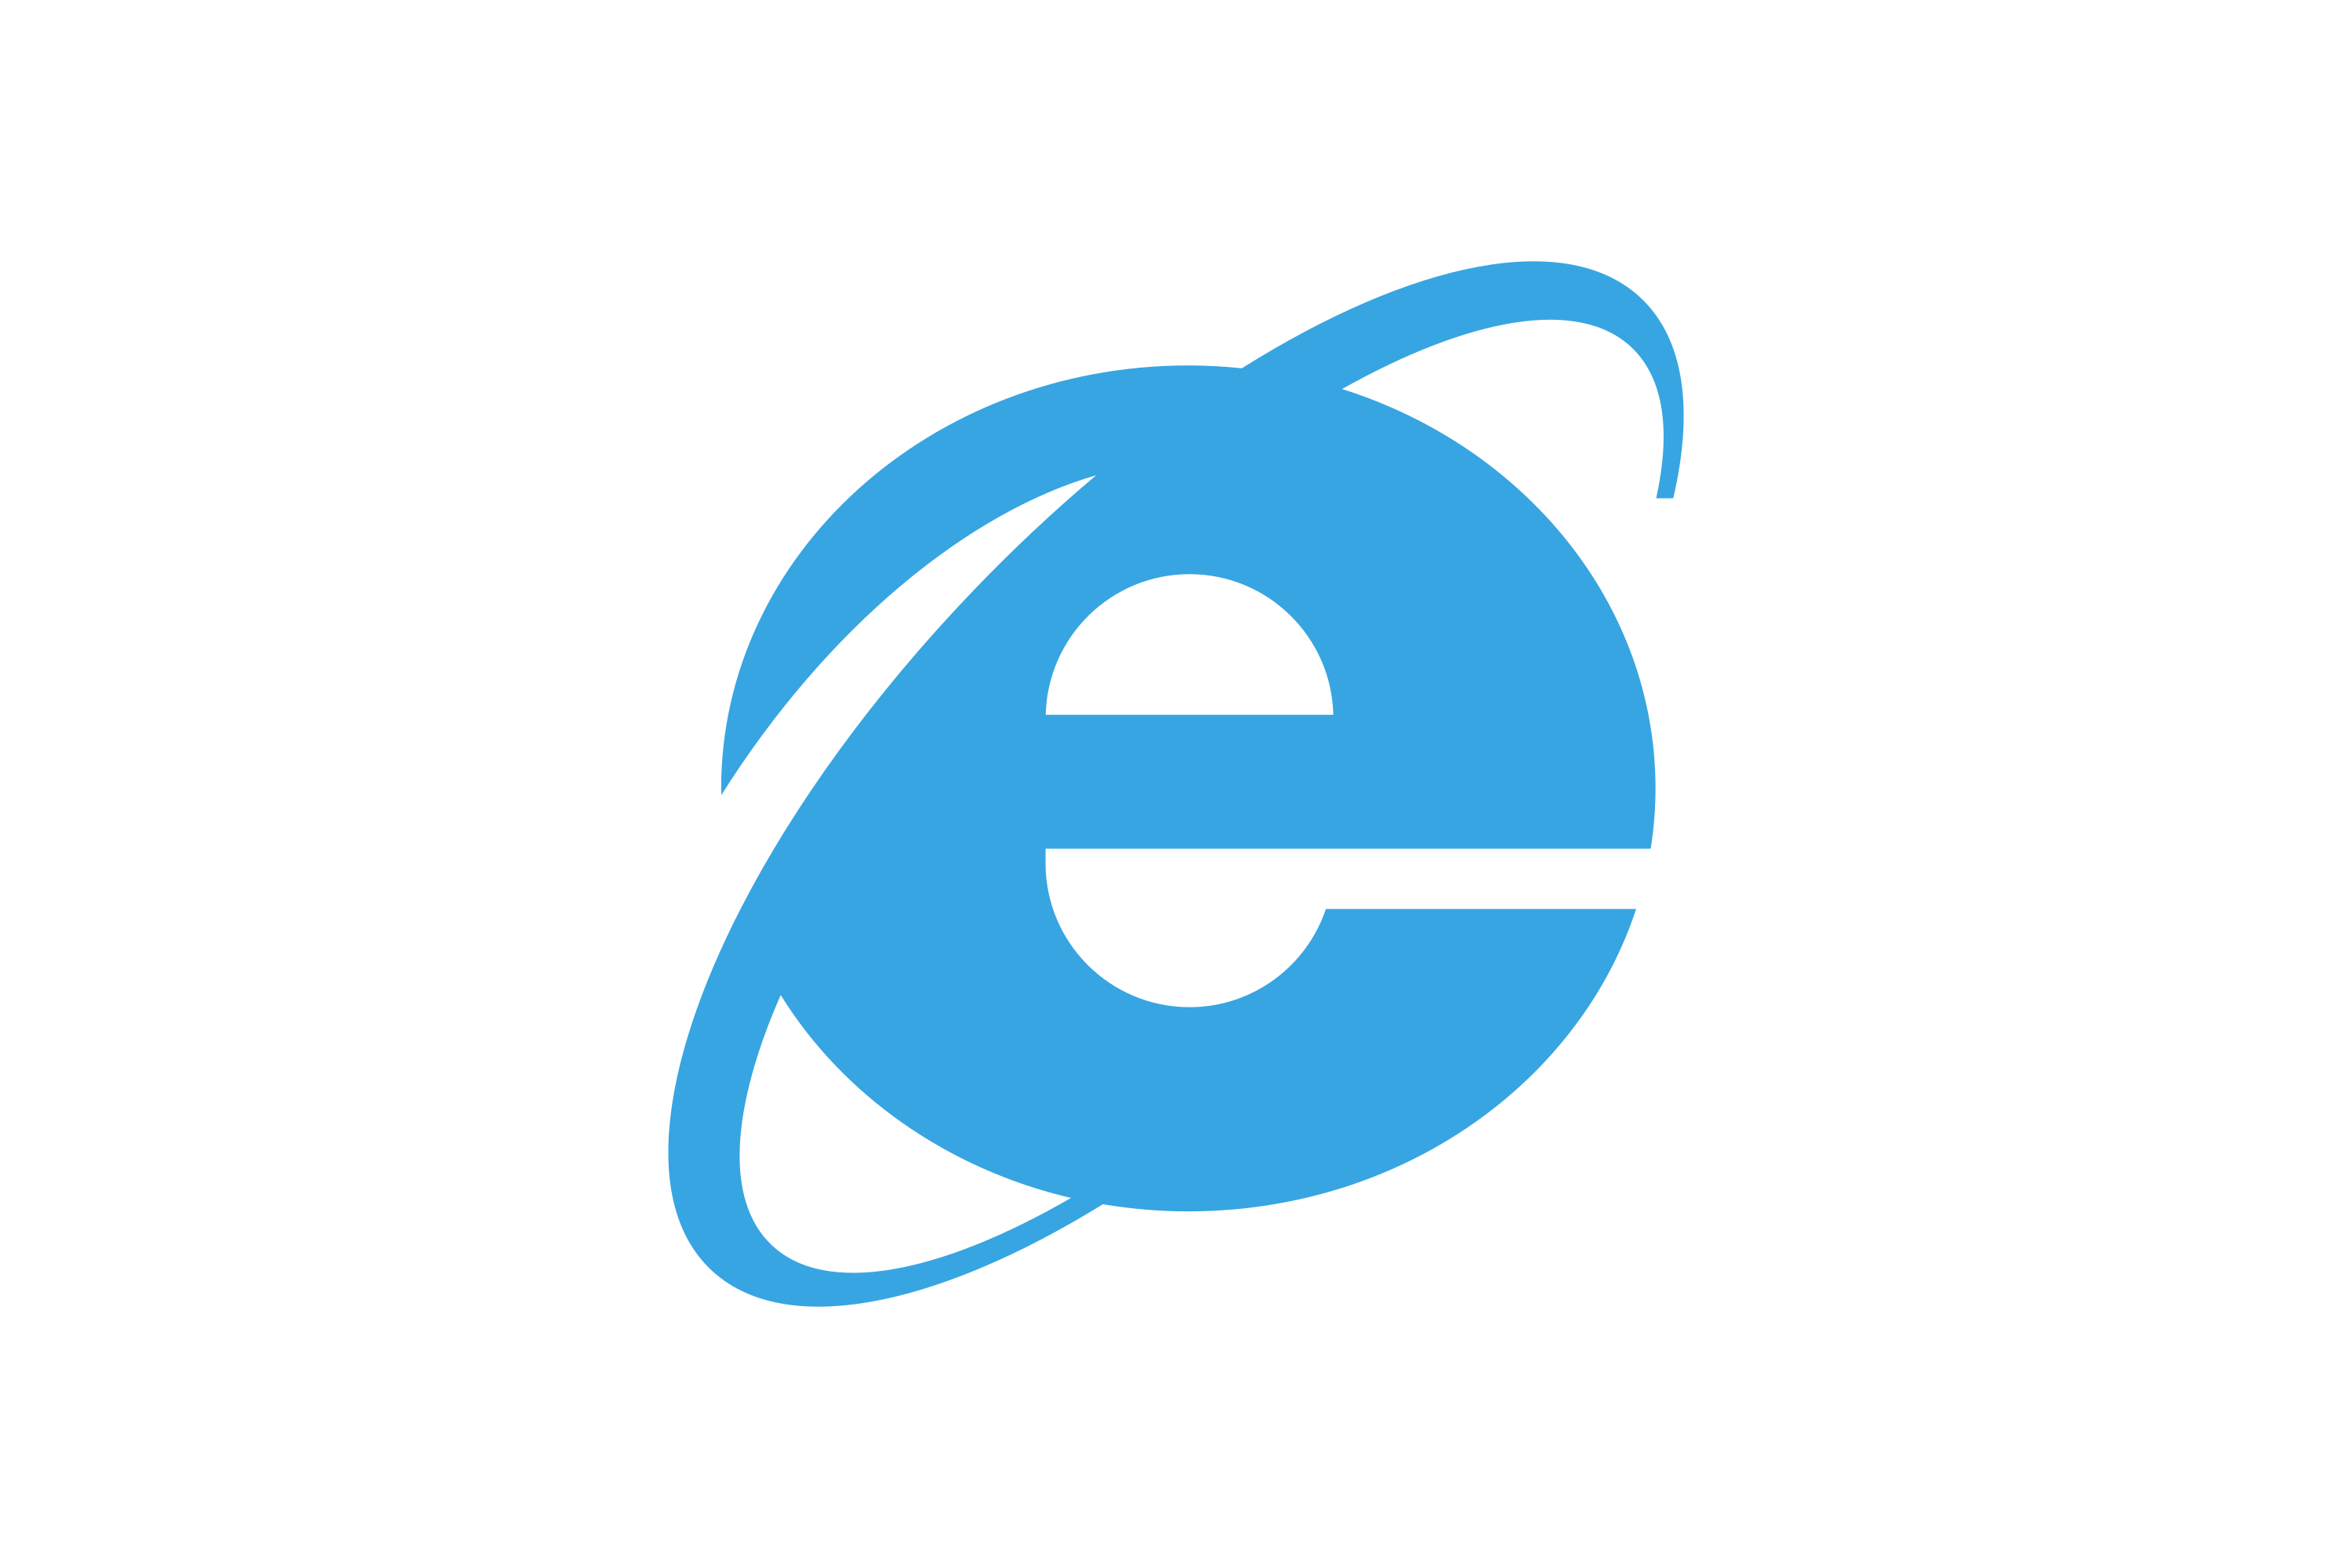 download latest internet explorer from microsoft